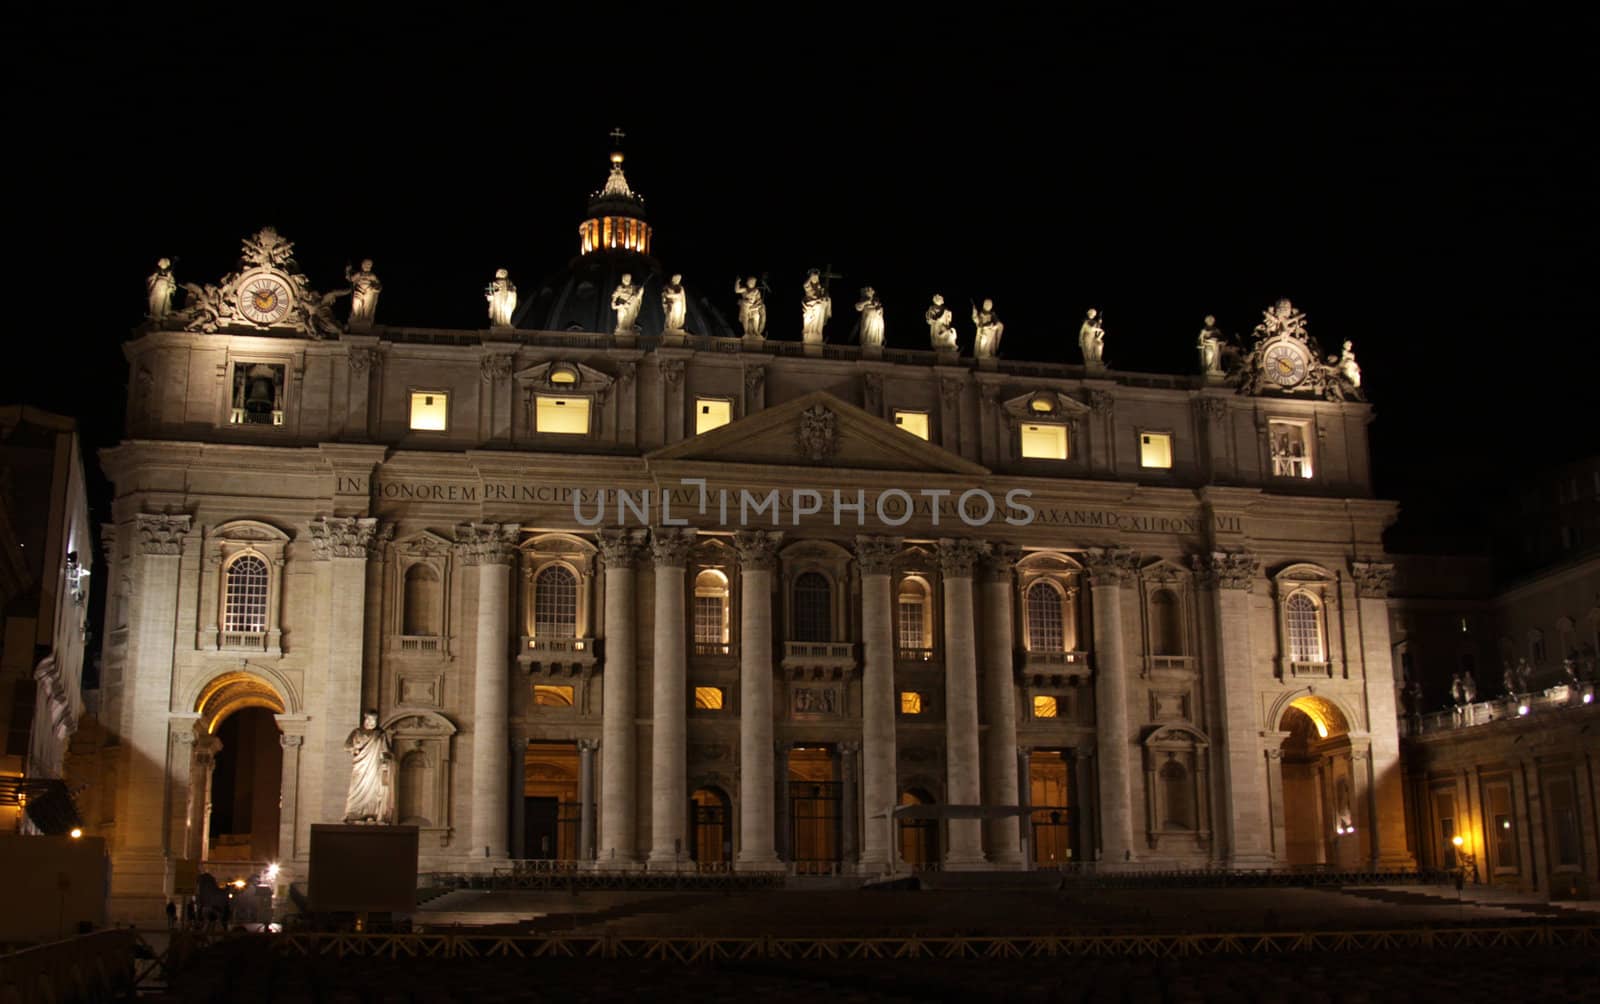 The front of St. Peter's Basilica, in Vatican city at night.
